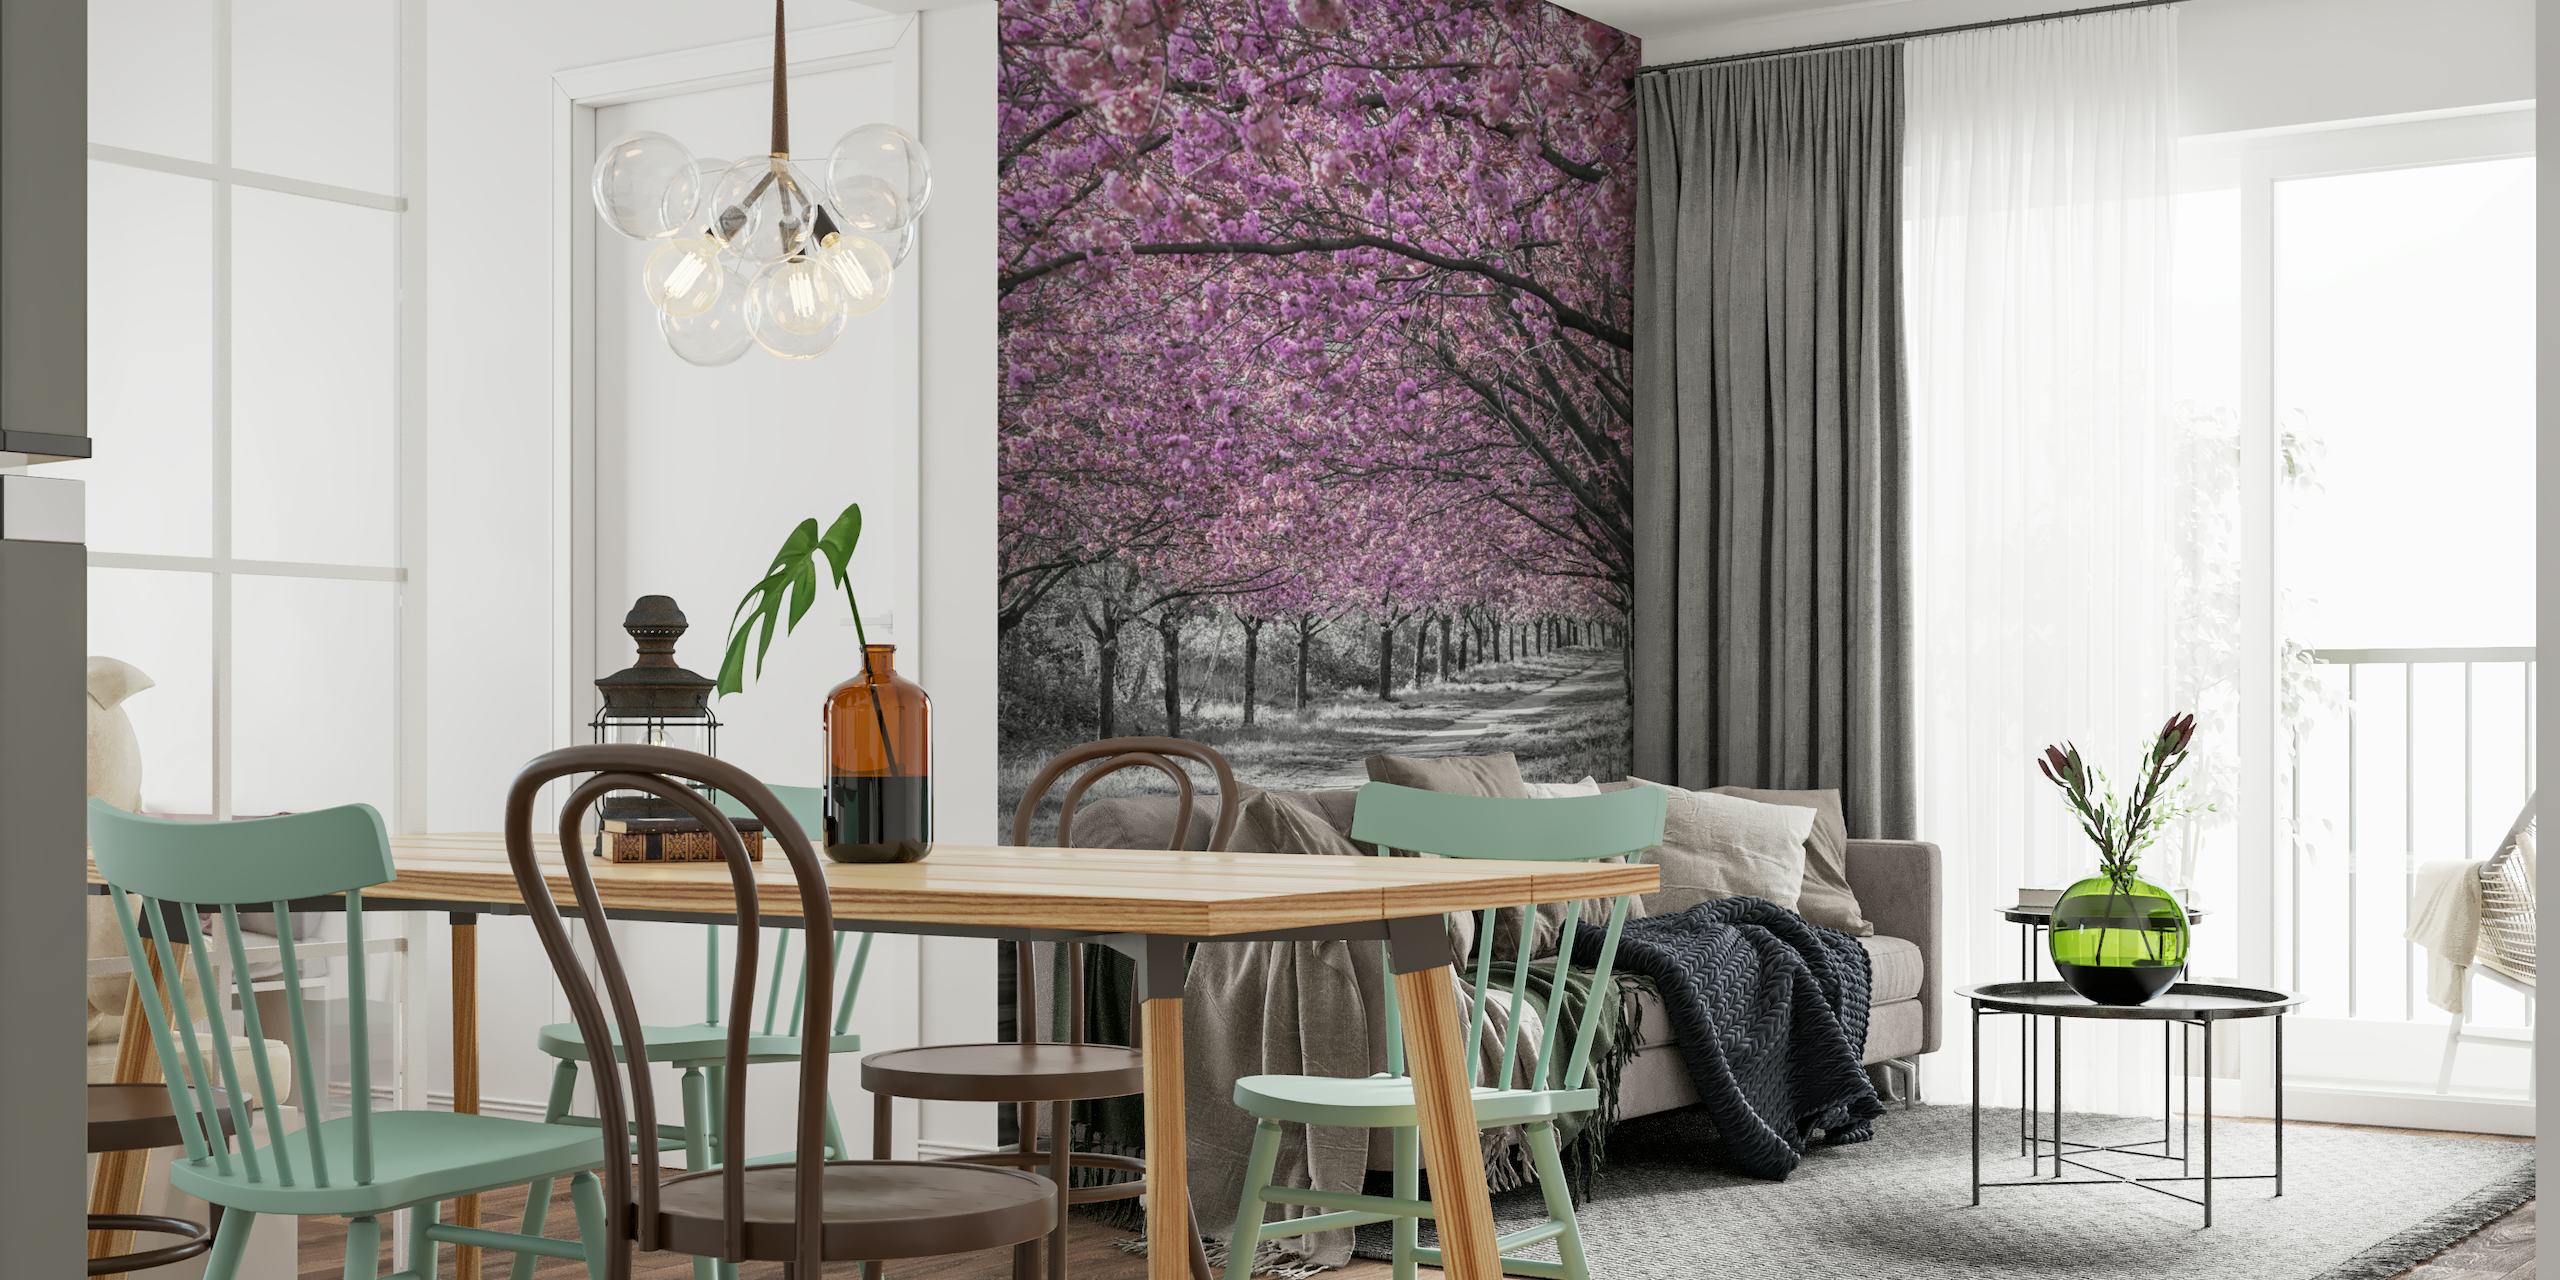 Cherry blossom path in pink behang